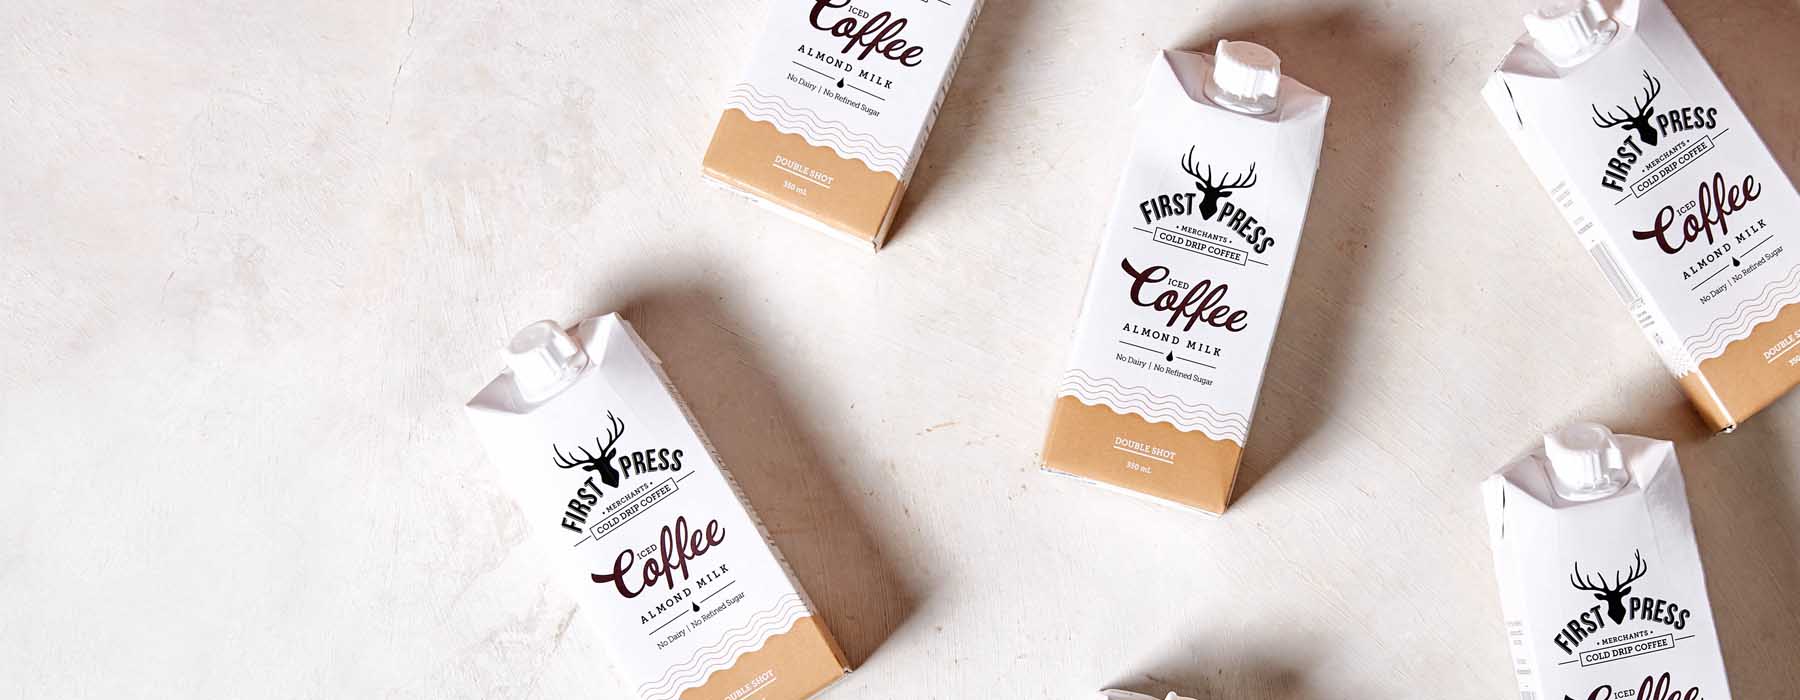 Sustainably sourced coffee